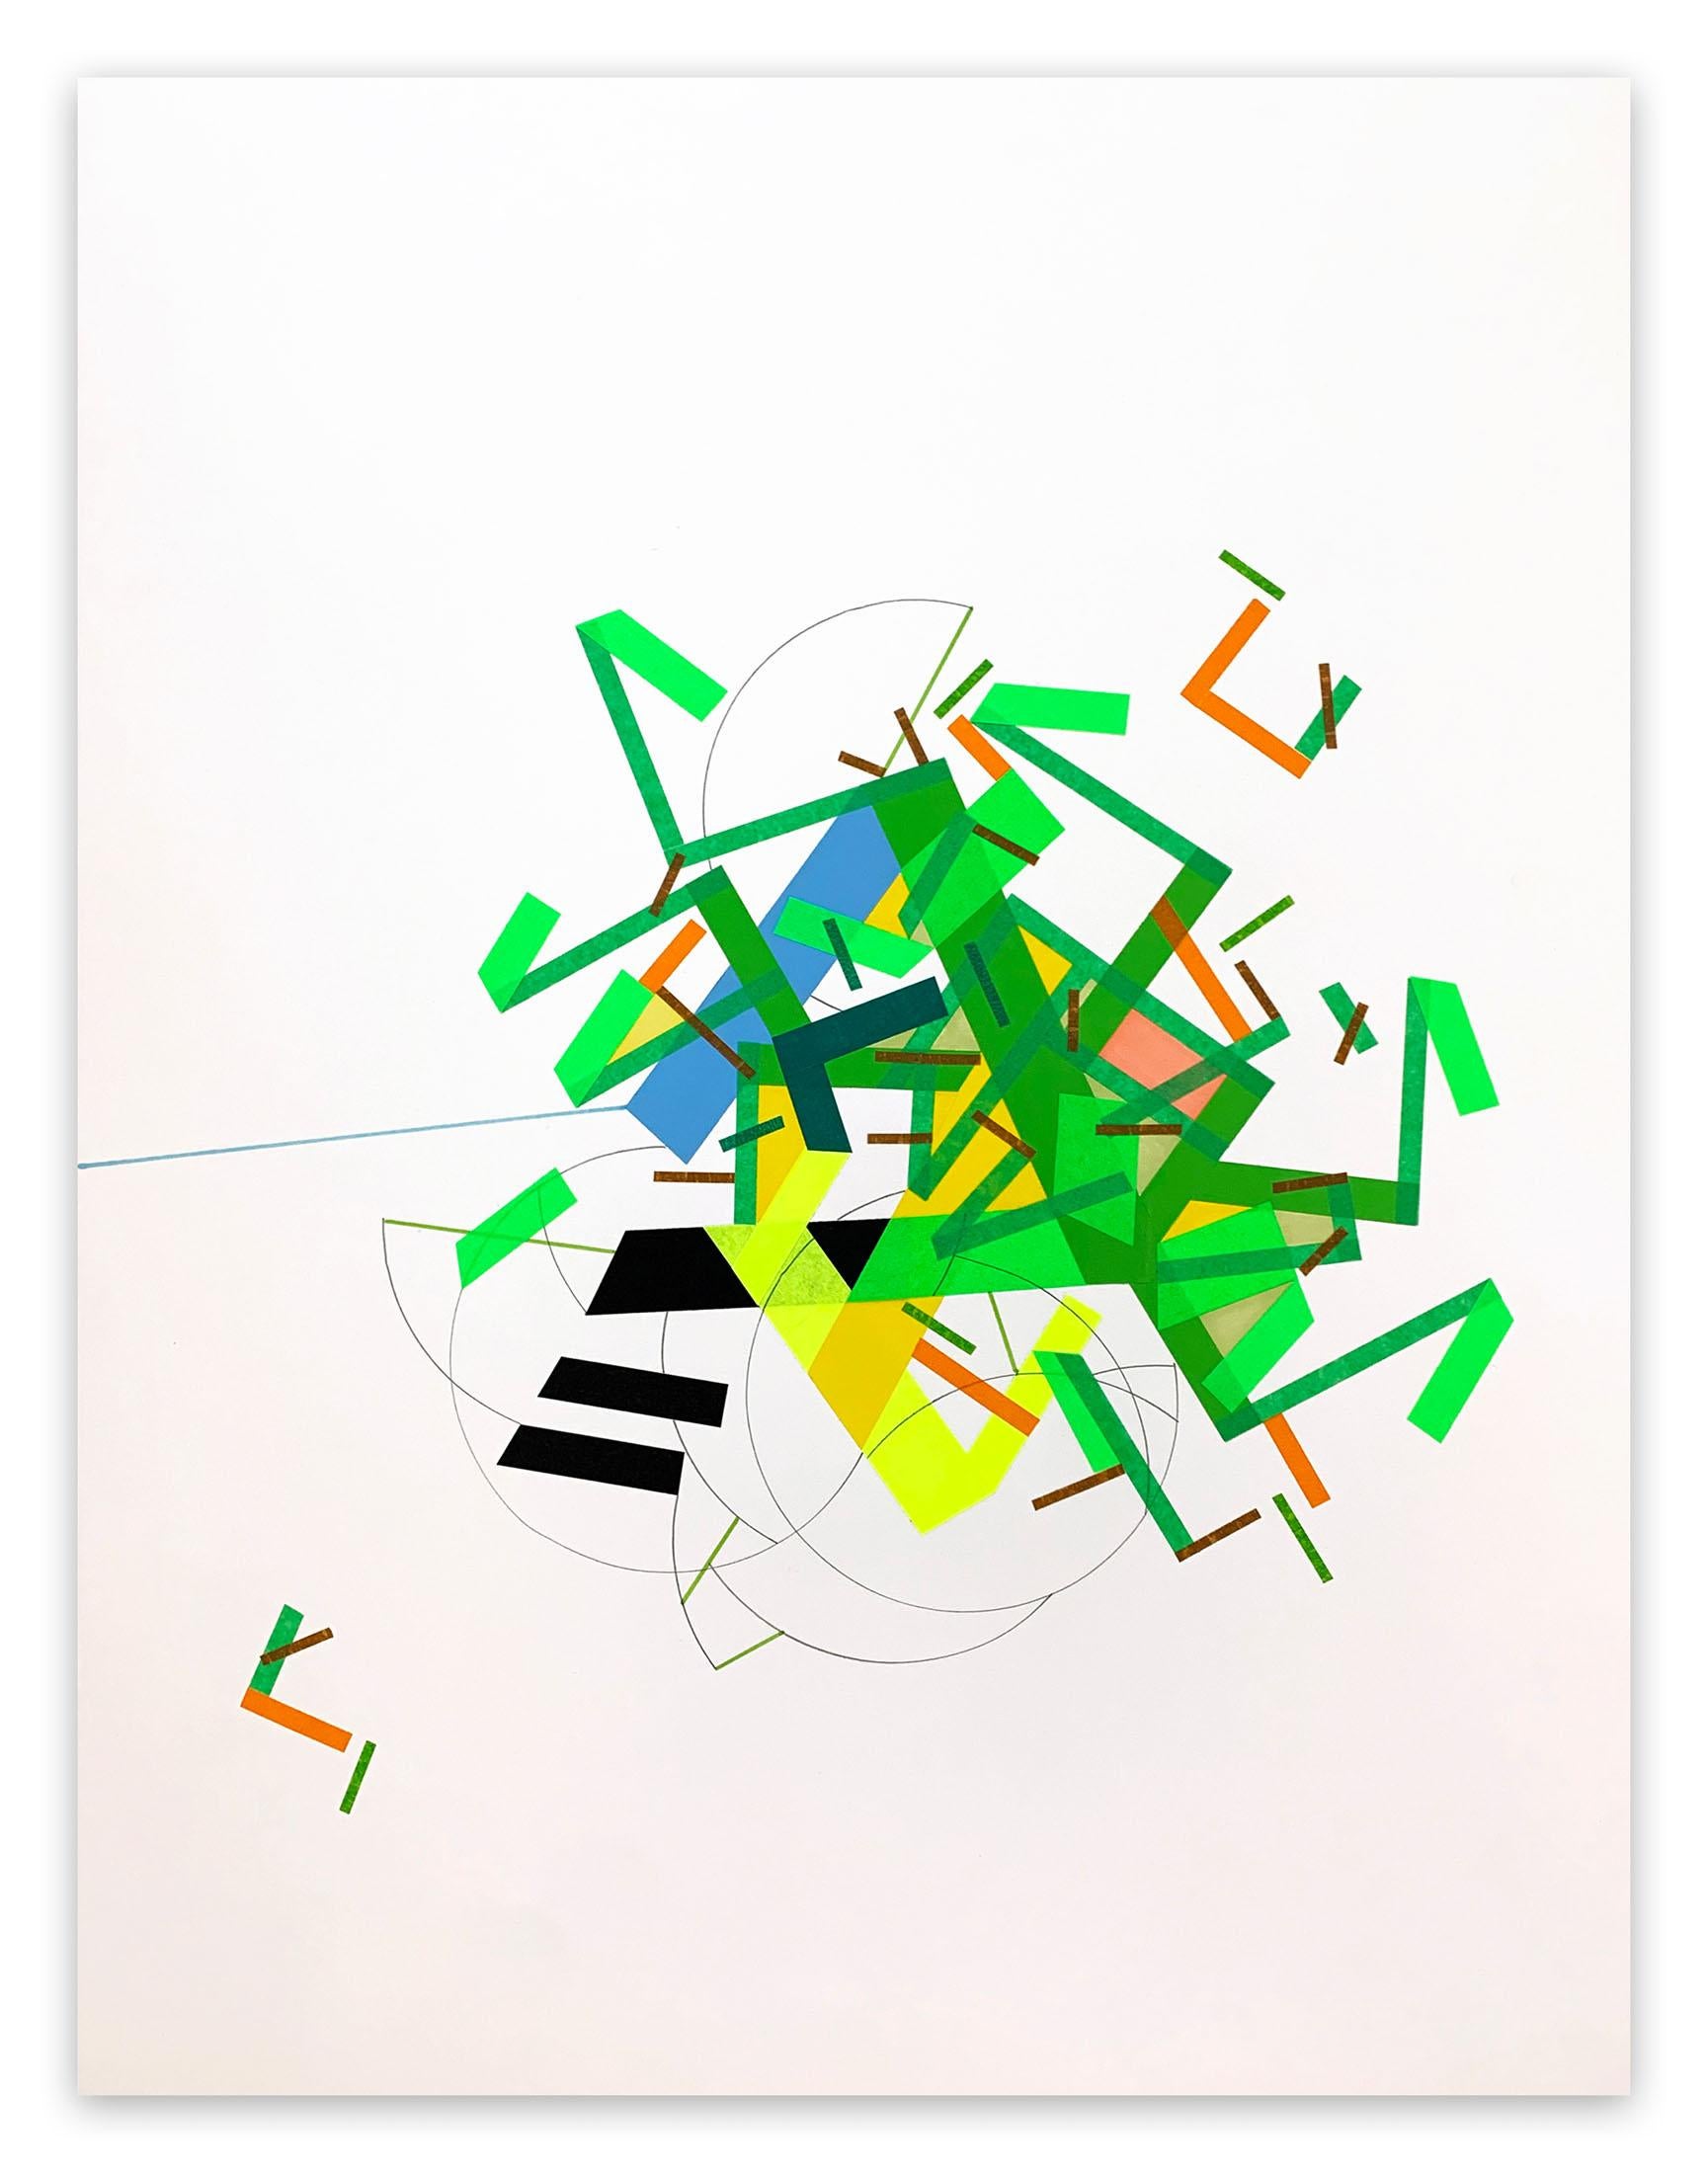 A Fiiane was Ilaand 8 (Abstract painting)

Color tape on paper - Unframed

Philippe Halaburda is a French artist who has coined the term Geographic Abstraction to describe his work. Through his use of color and lines, Halaburda creates sharp